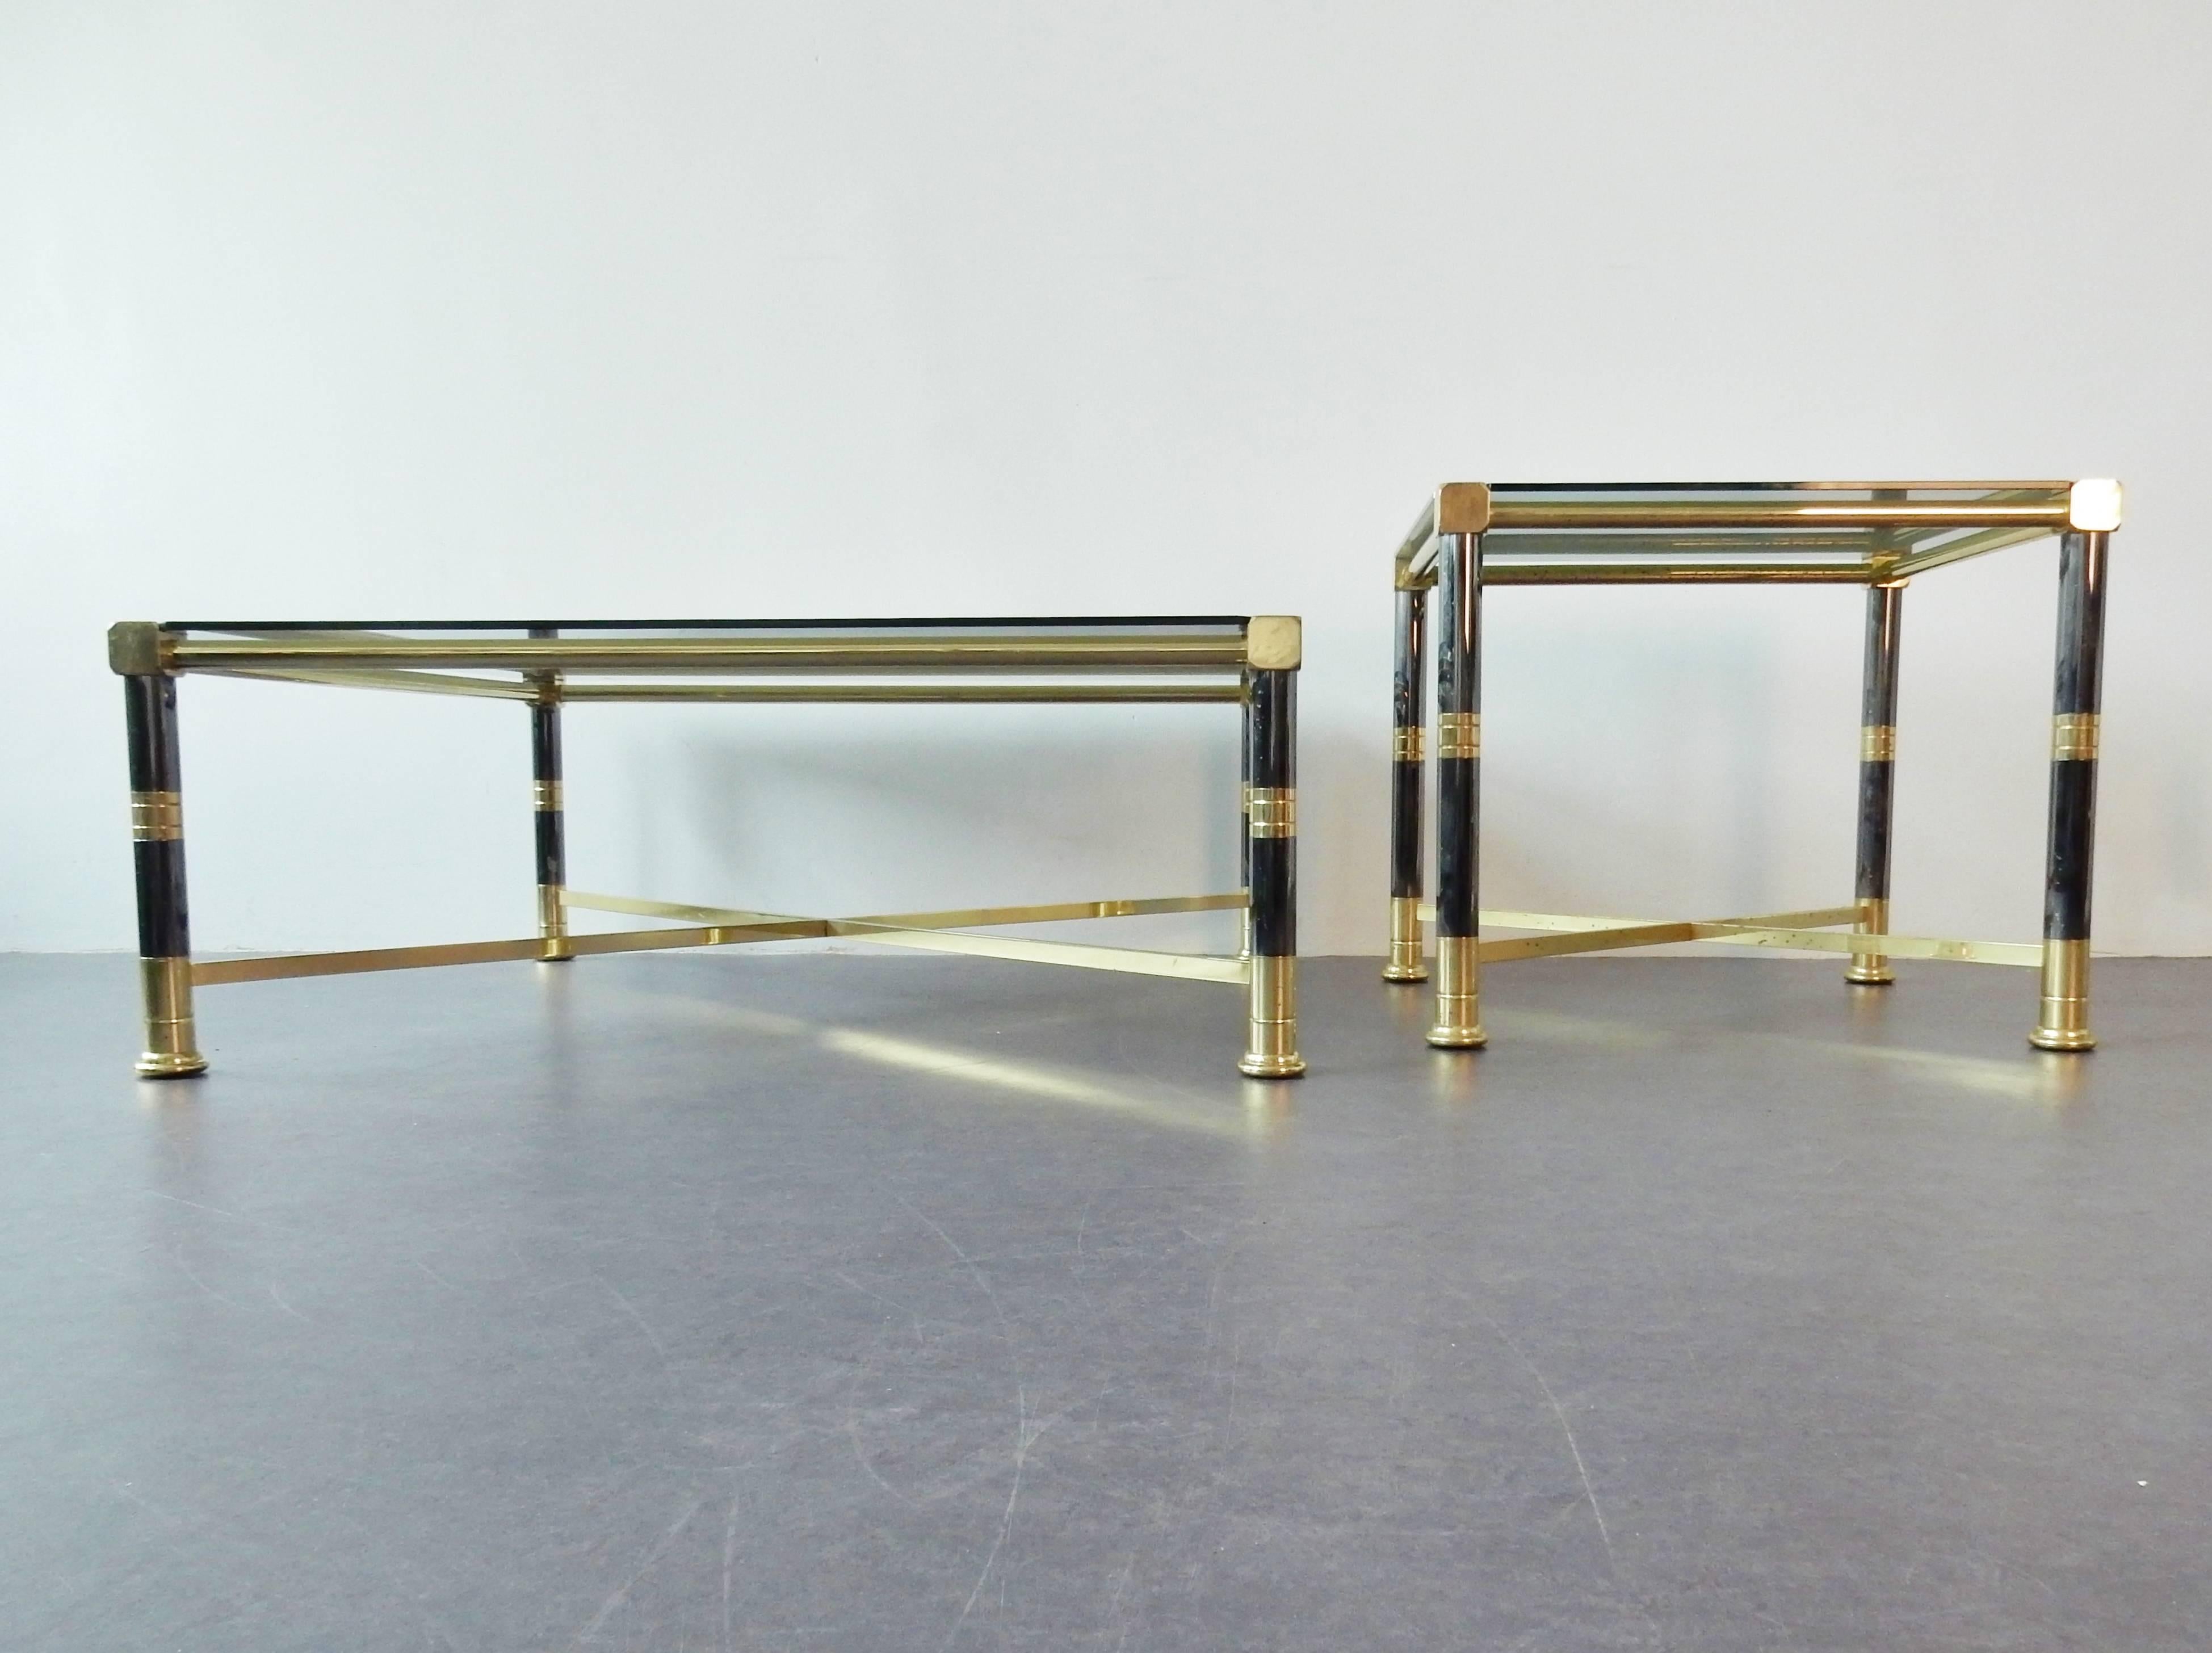 Set of 2 tables in grey metal (bit like petrol blue) and brass with a smoked glass top. All in very good condition with some smaller signs of age and use. No chips or damages to the glass top. This set is a great representation of the 